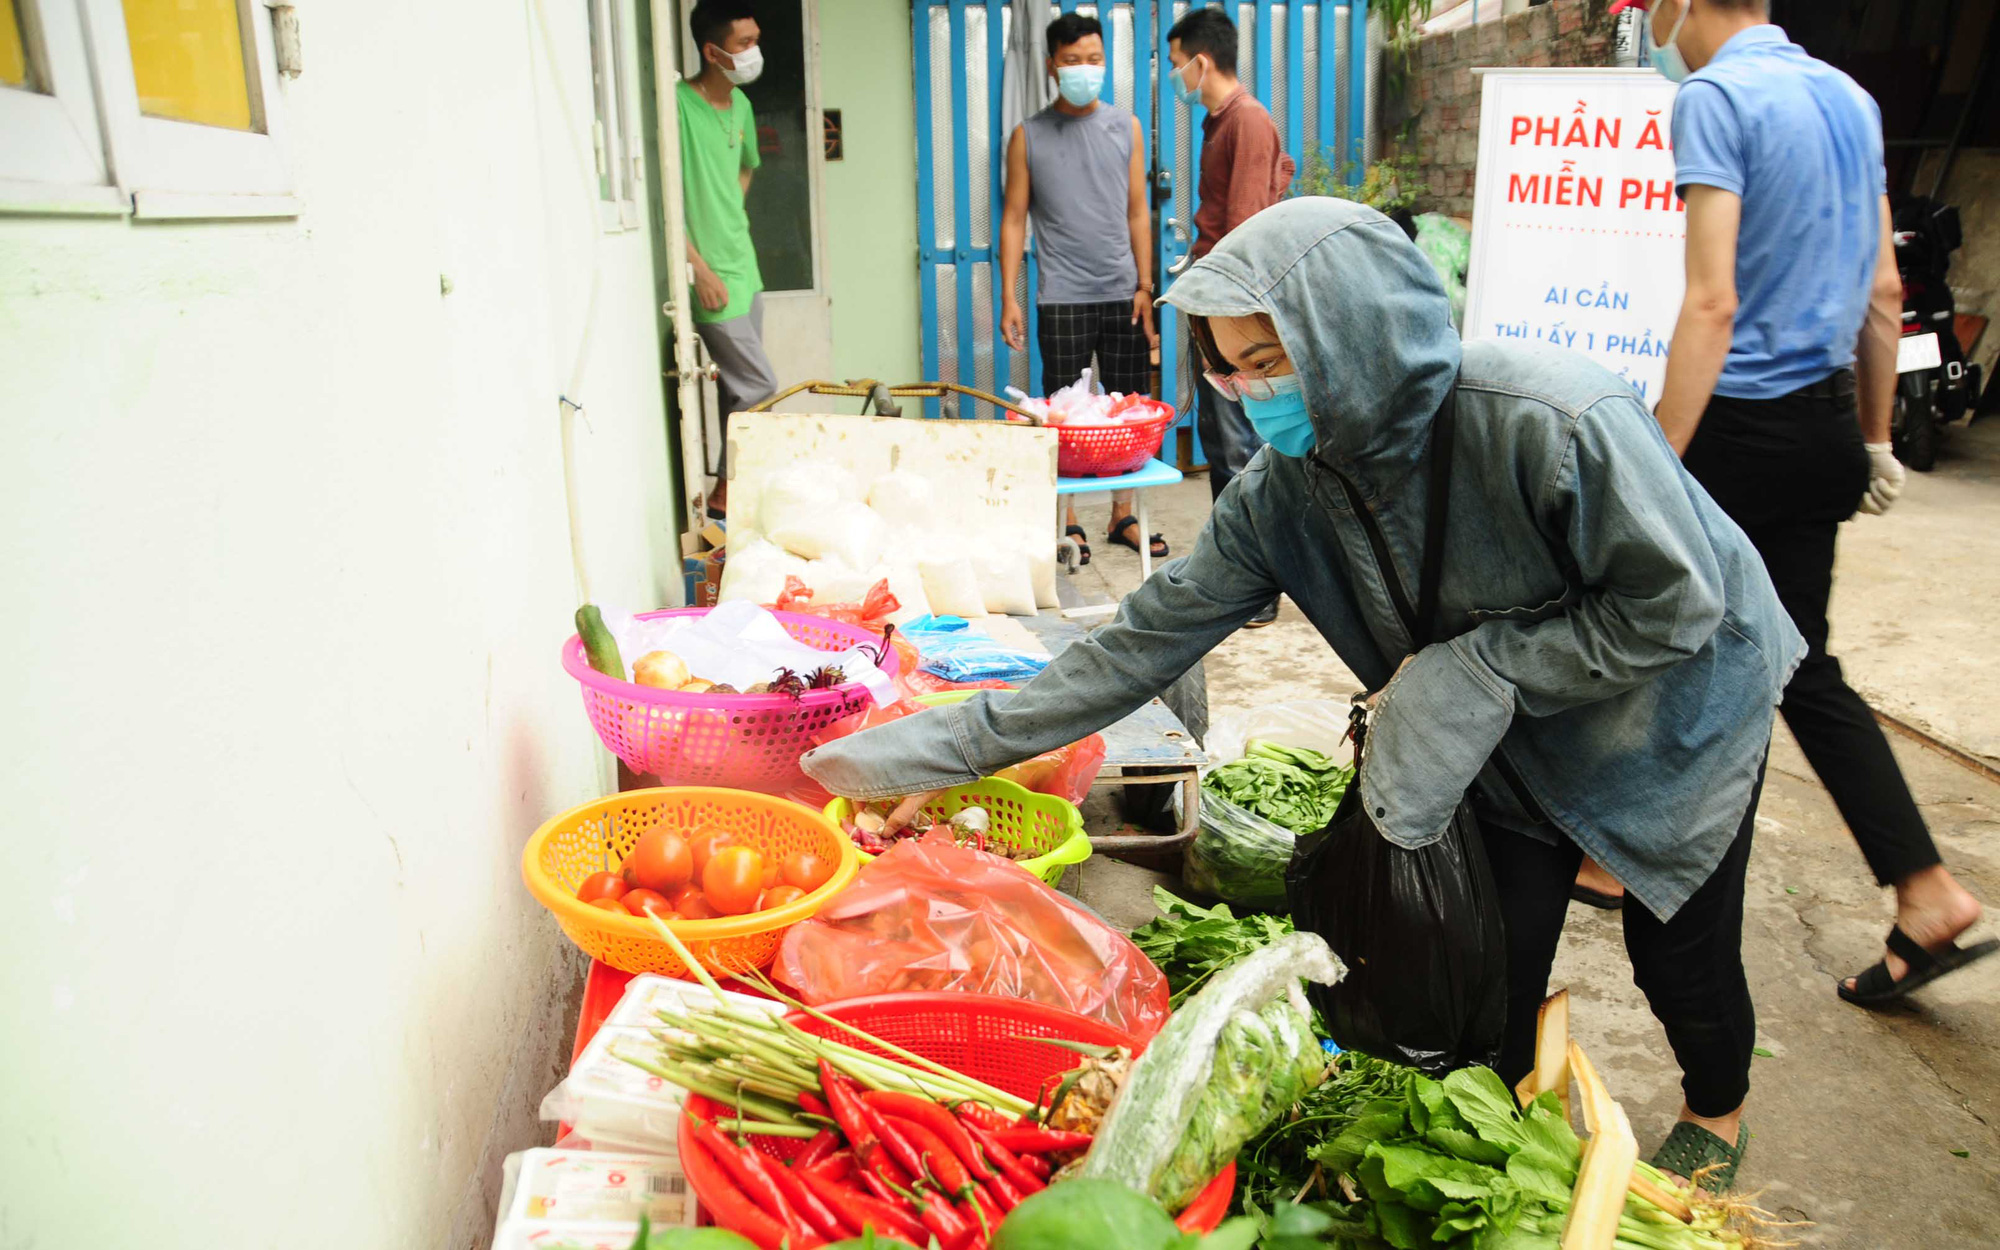 ‘Zero-VND Market’ offers much needed aid for out-of-town students stranded in Da Nang